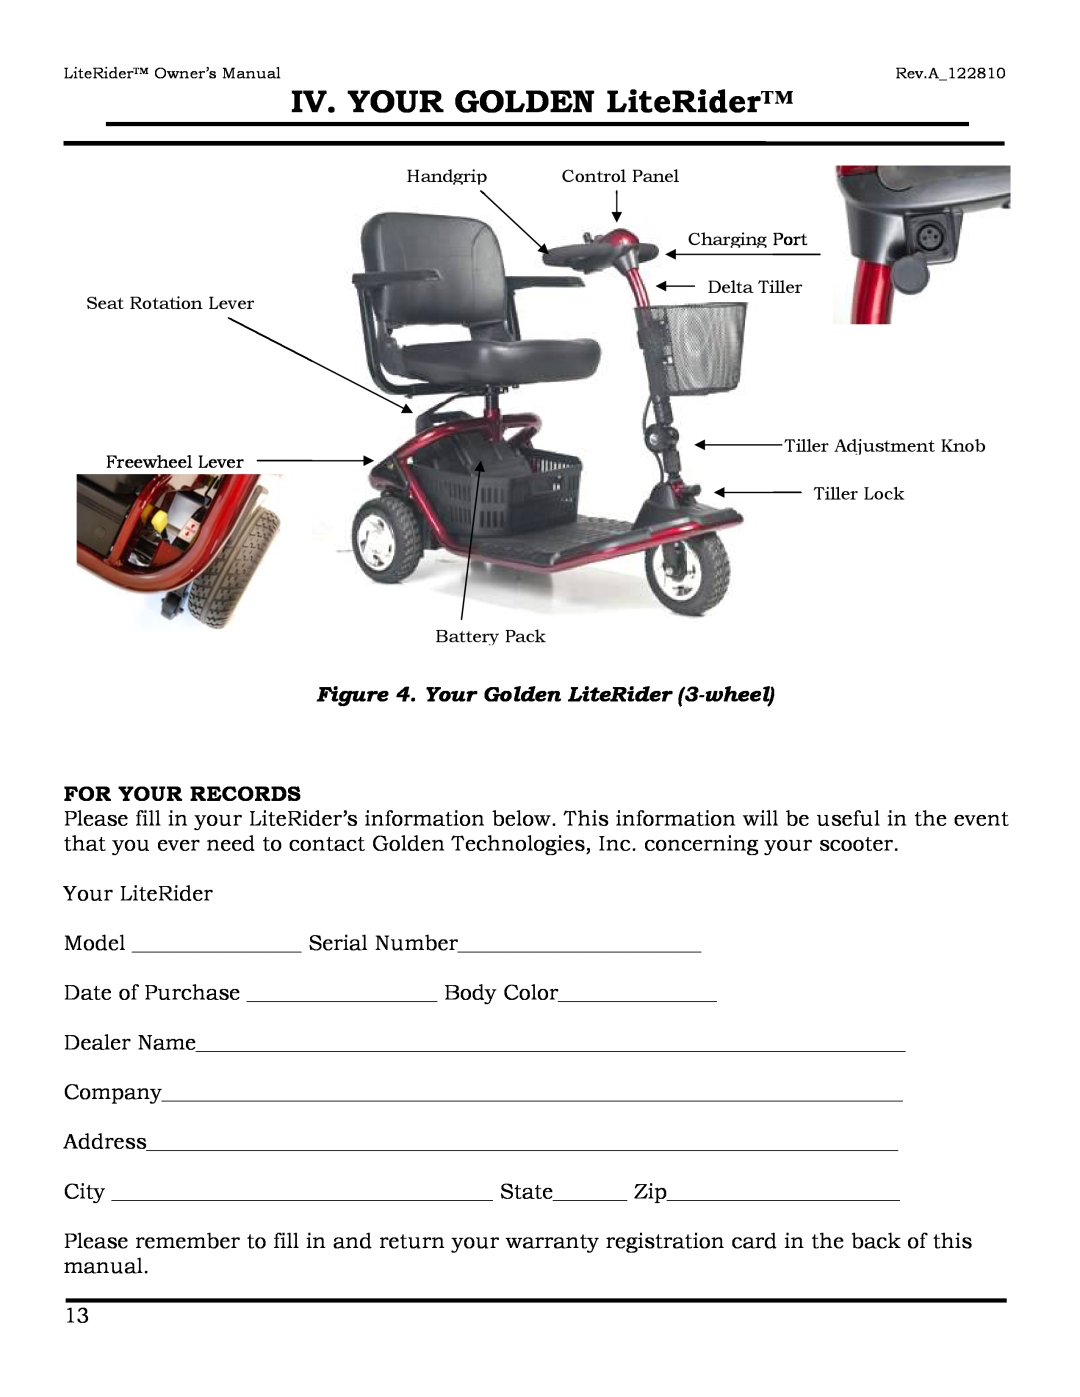 Golden Technologies GL140, GL110 owner manual IV. YOUR GOLDEN LiteRider, Your Golden LiteRider 3-wheel, For Your Records 